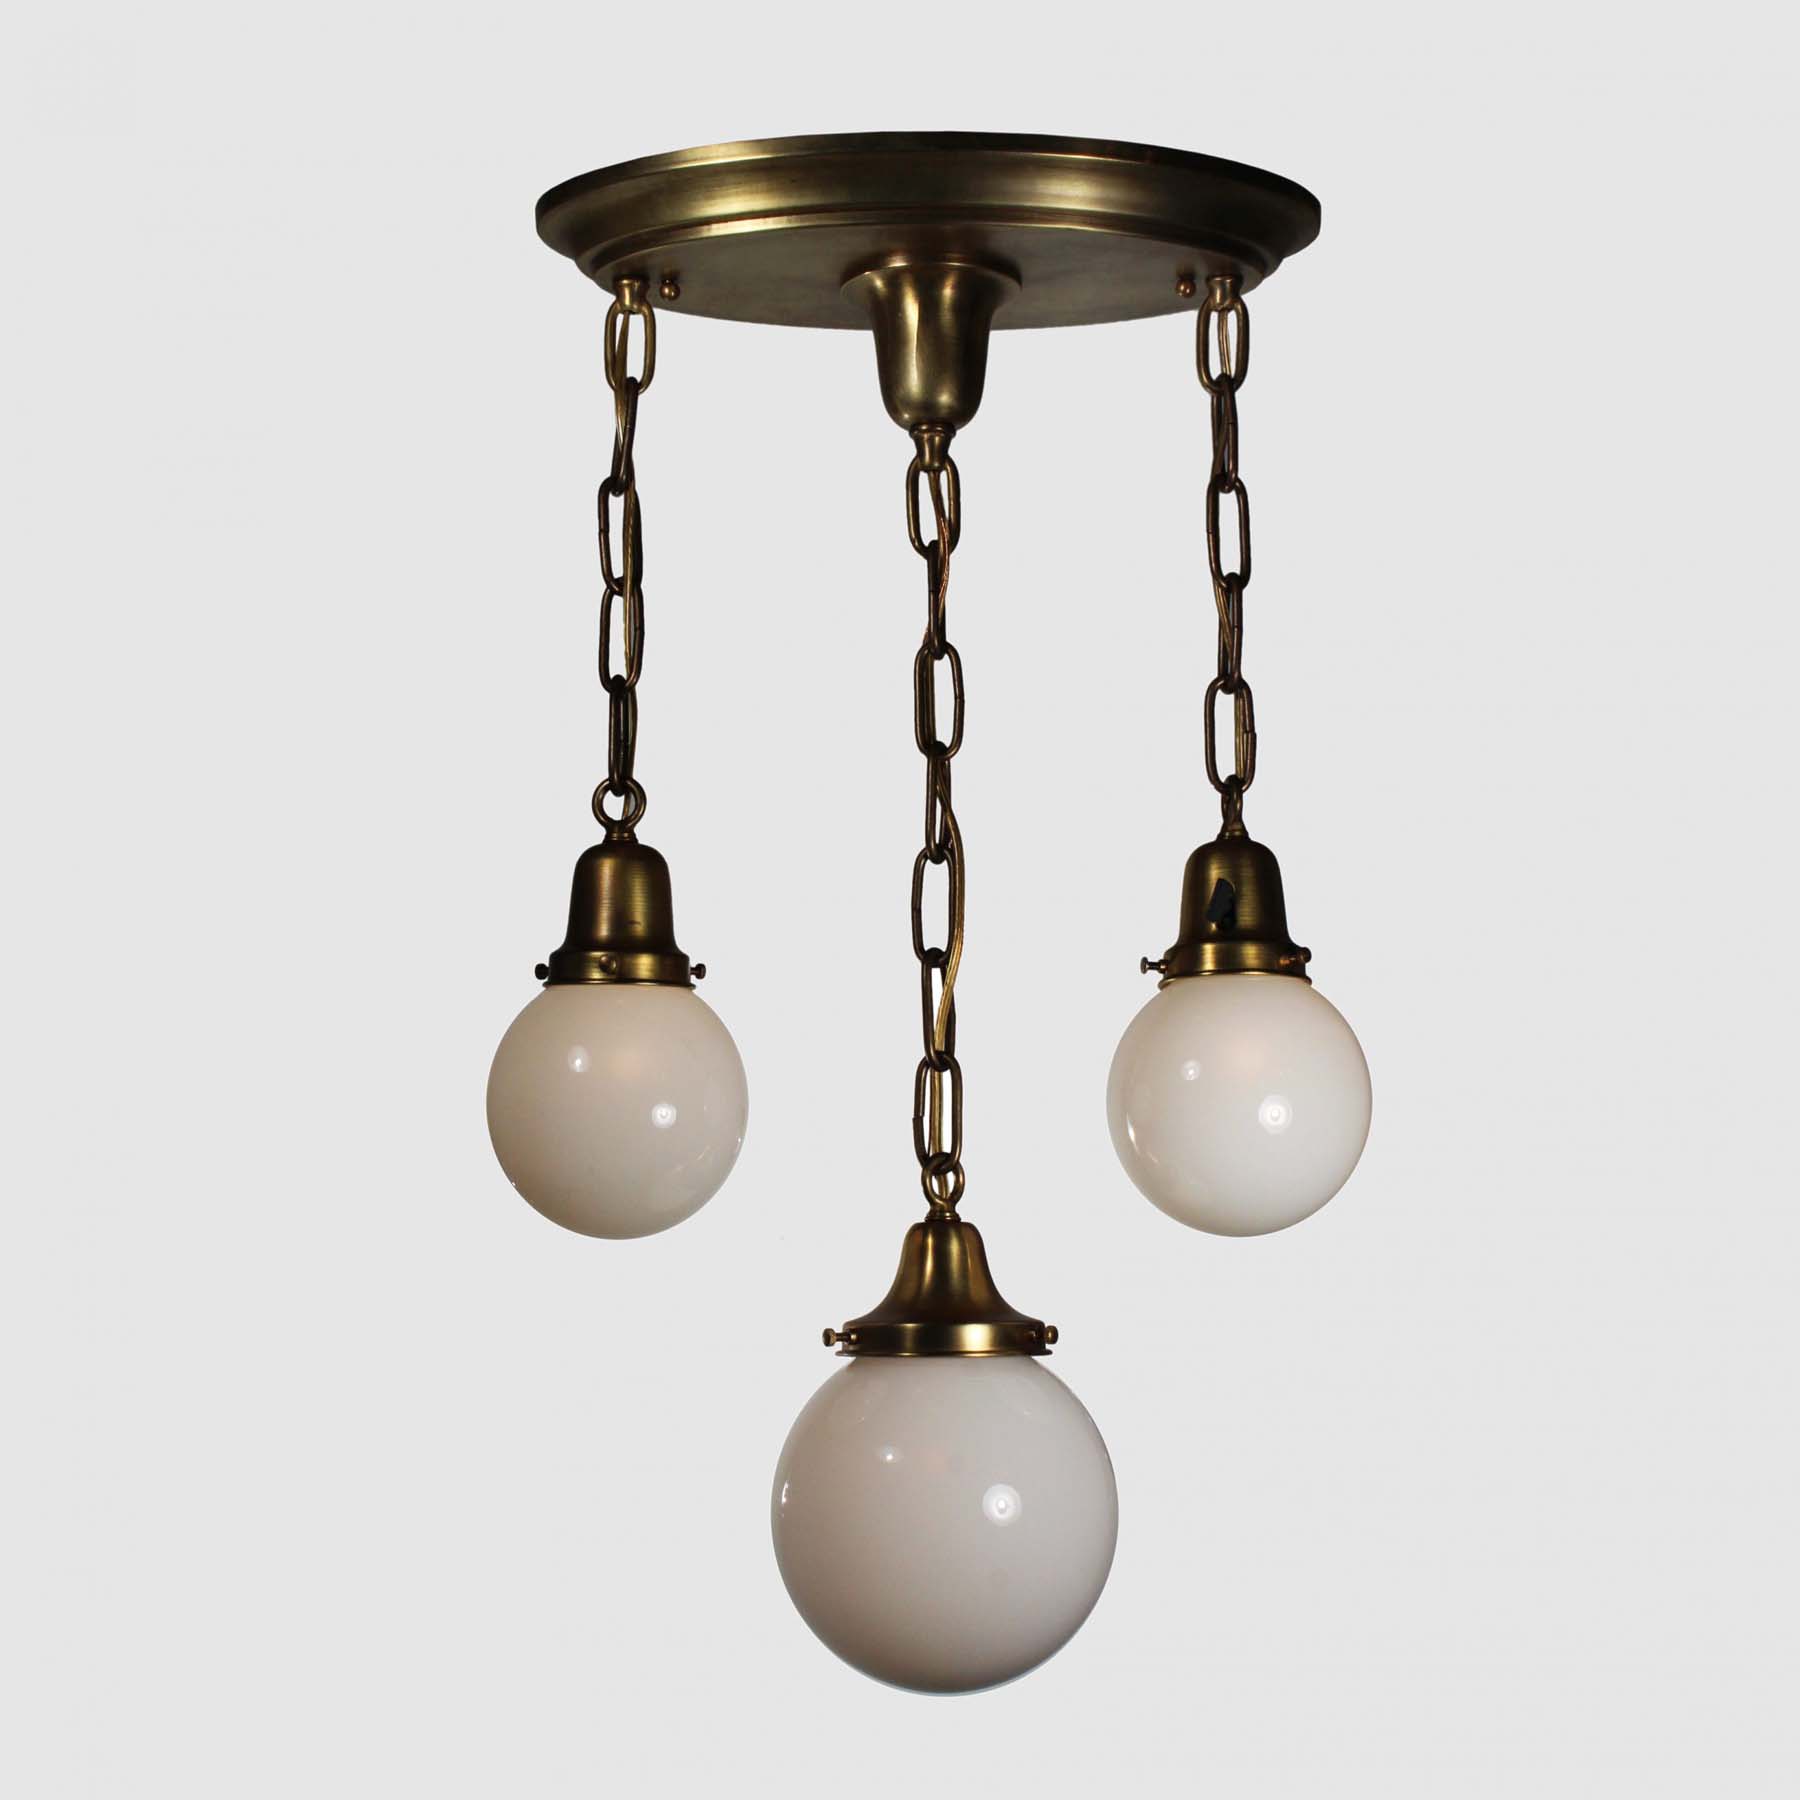 SOLD Antique Brass Semi Flush-Mount Chandelier with Ball Shades-69676